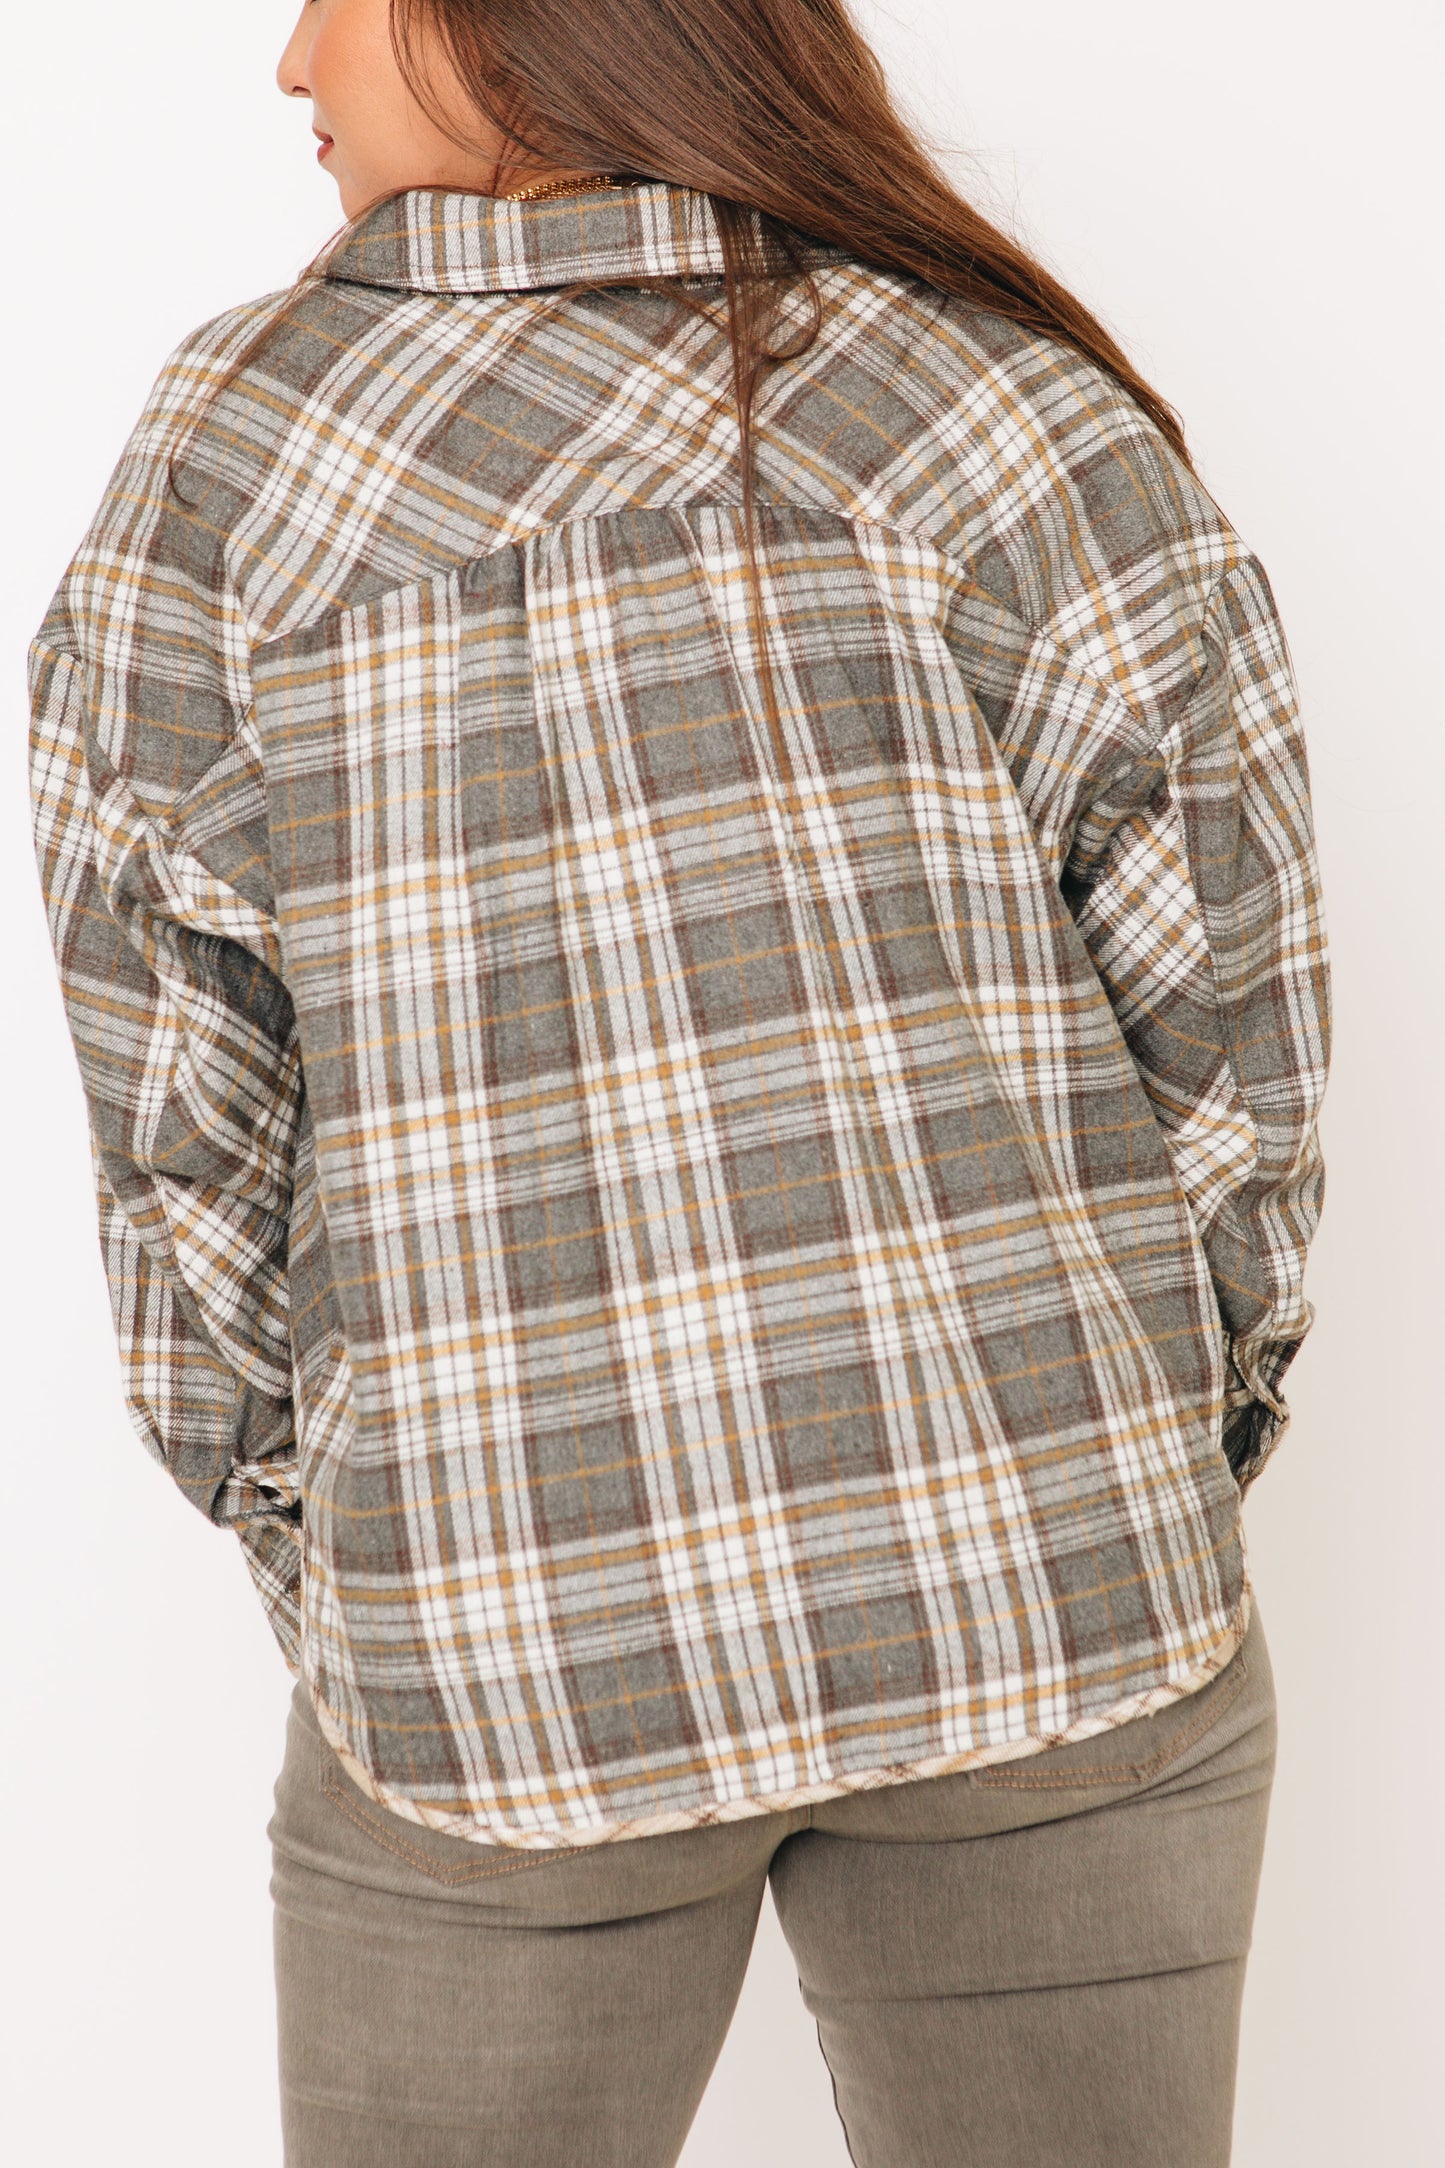 Amber Plaid Oversized Button Up Shirt (S-L)